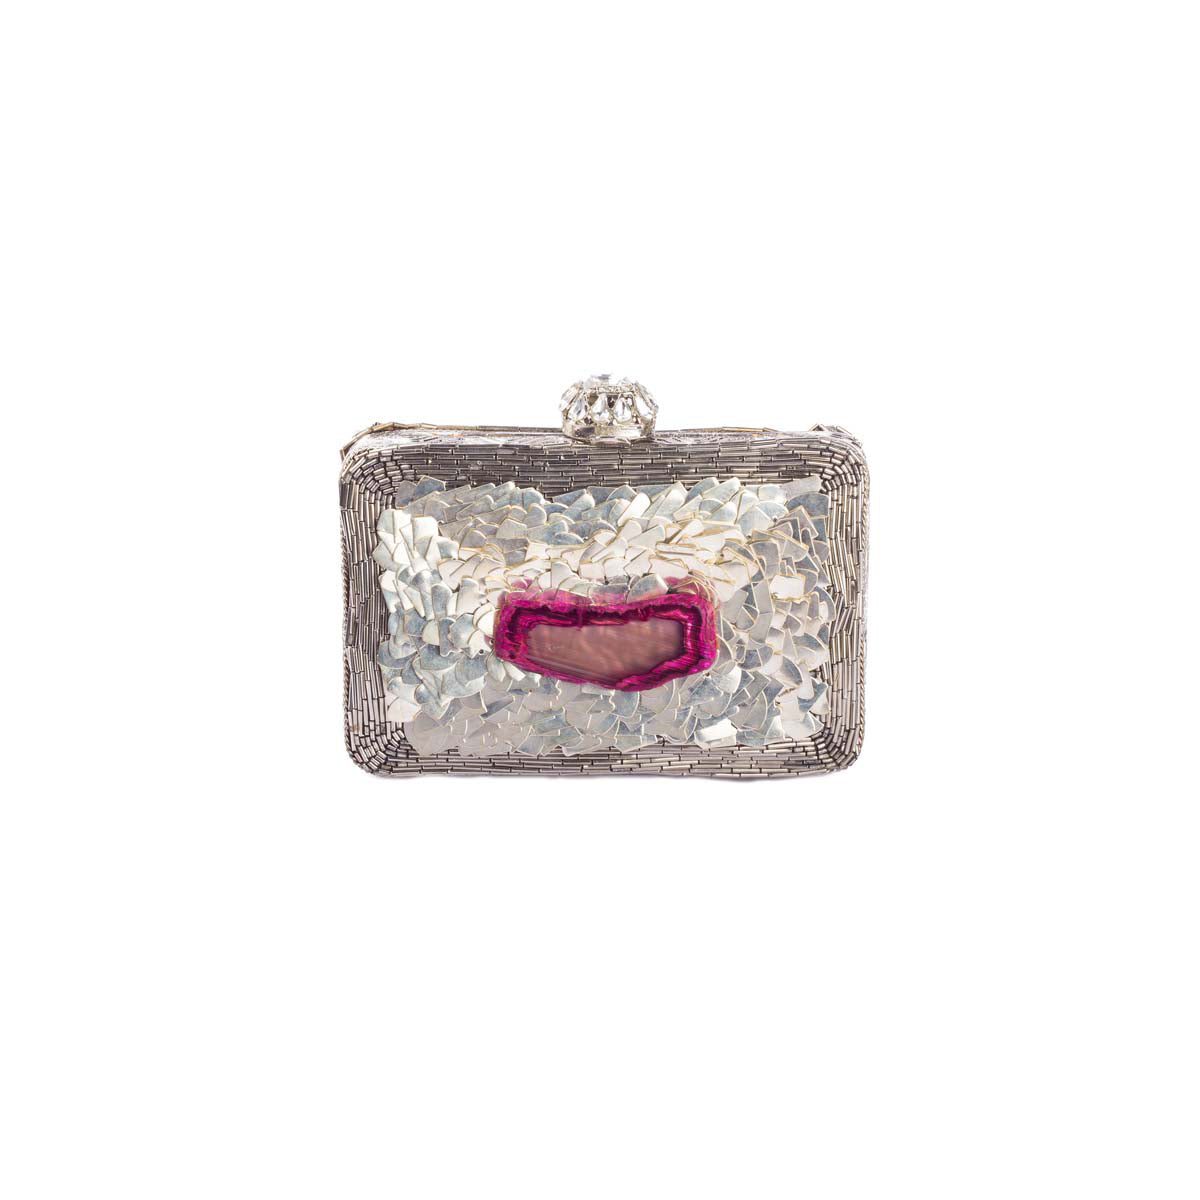 Unleash the bling-obsessed-diva within! Our silver metal clutch perfected with a pink moon rock will have the stars saluting your style!